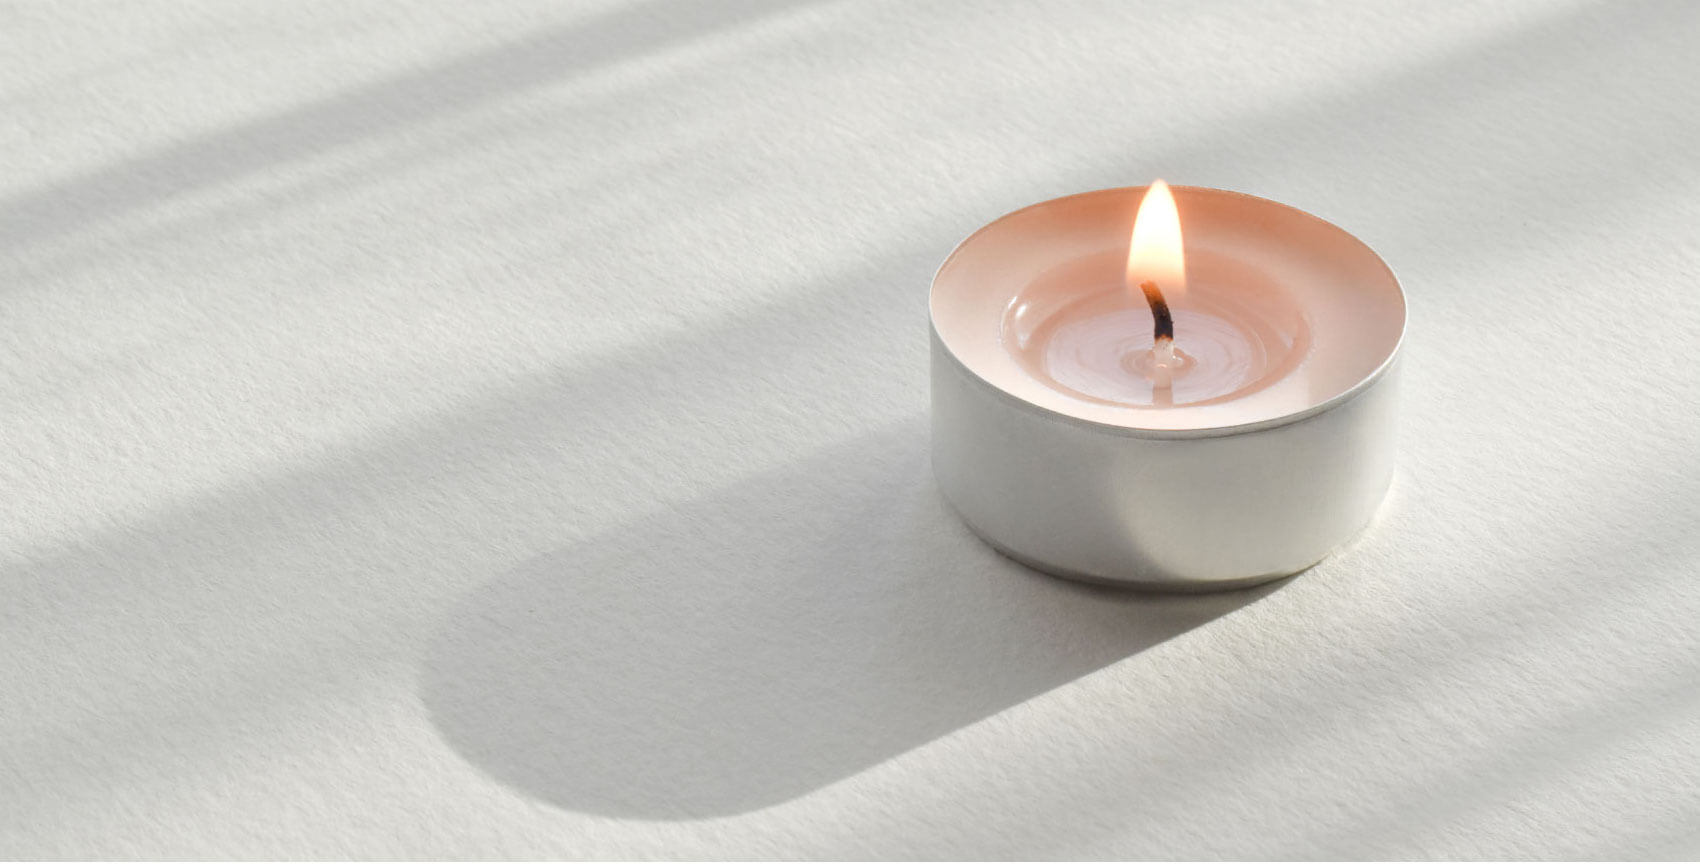 A soothing pink tea light resting on a peaceful, cream surface inviting the reader to imagine what Meditation and Mindfulness might feel like.